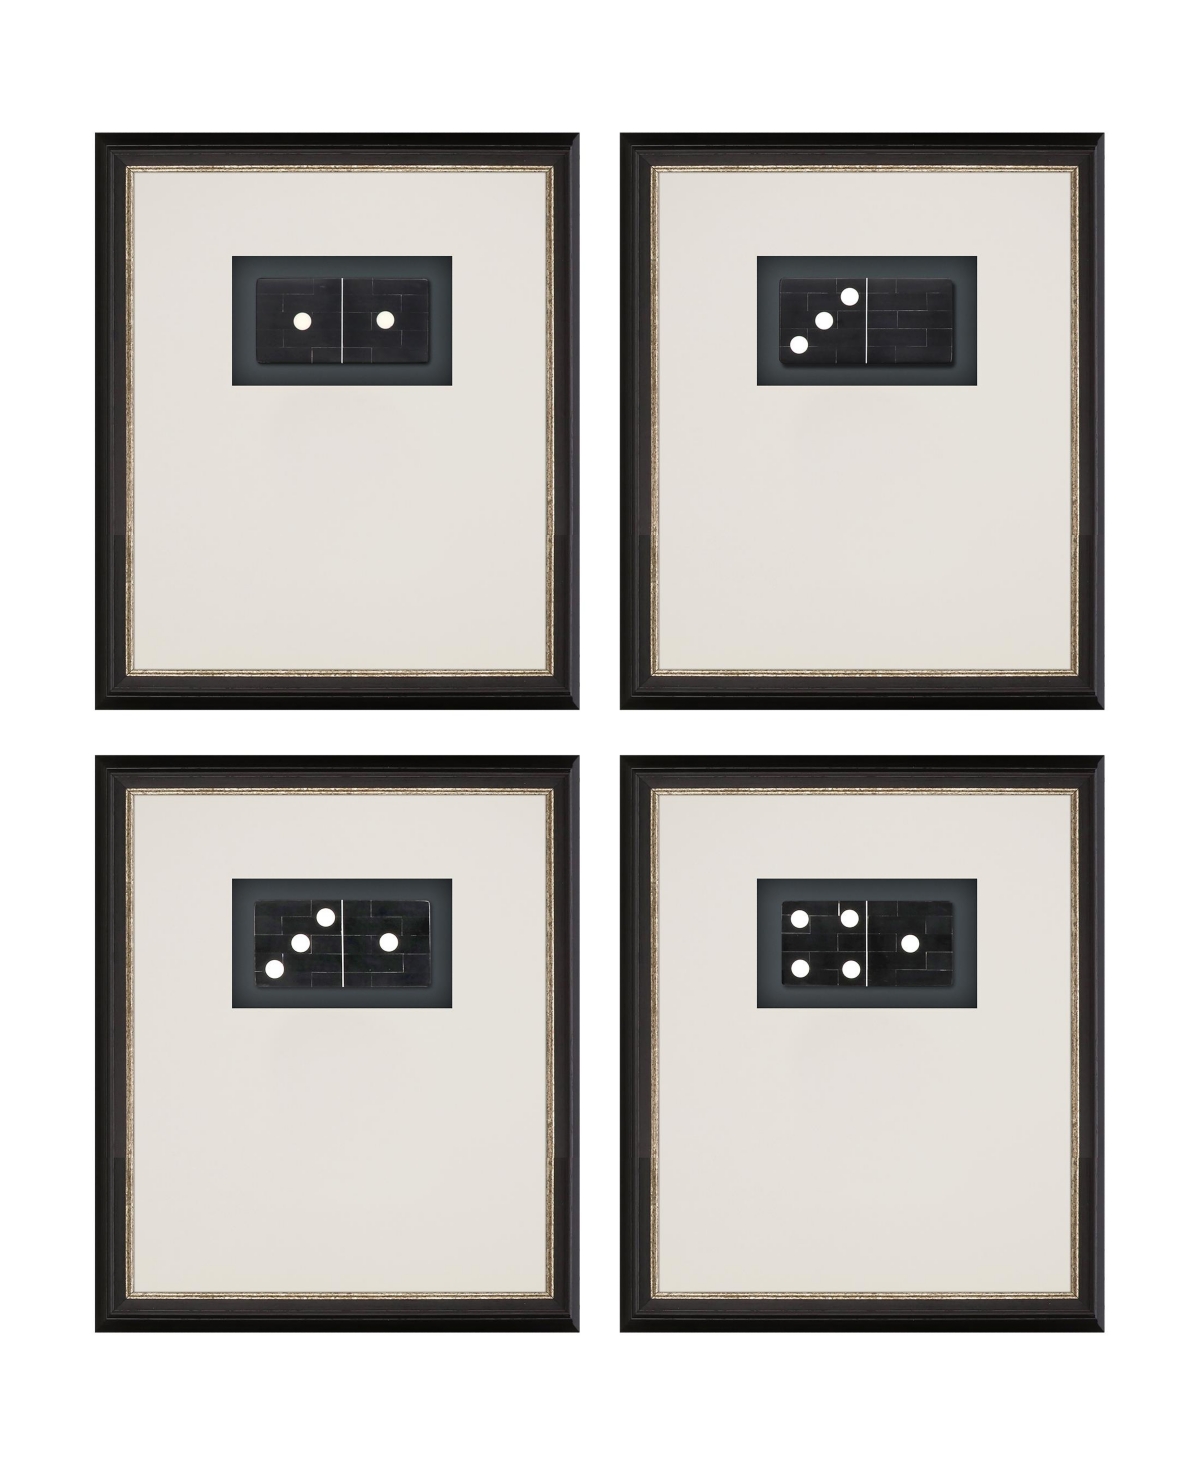 Paragon Picture Gallery Dominoes Framed Art, Set Of 4 In Black